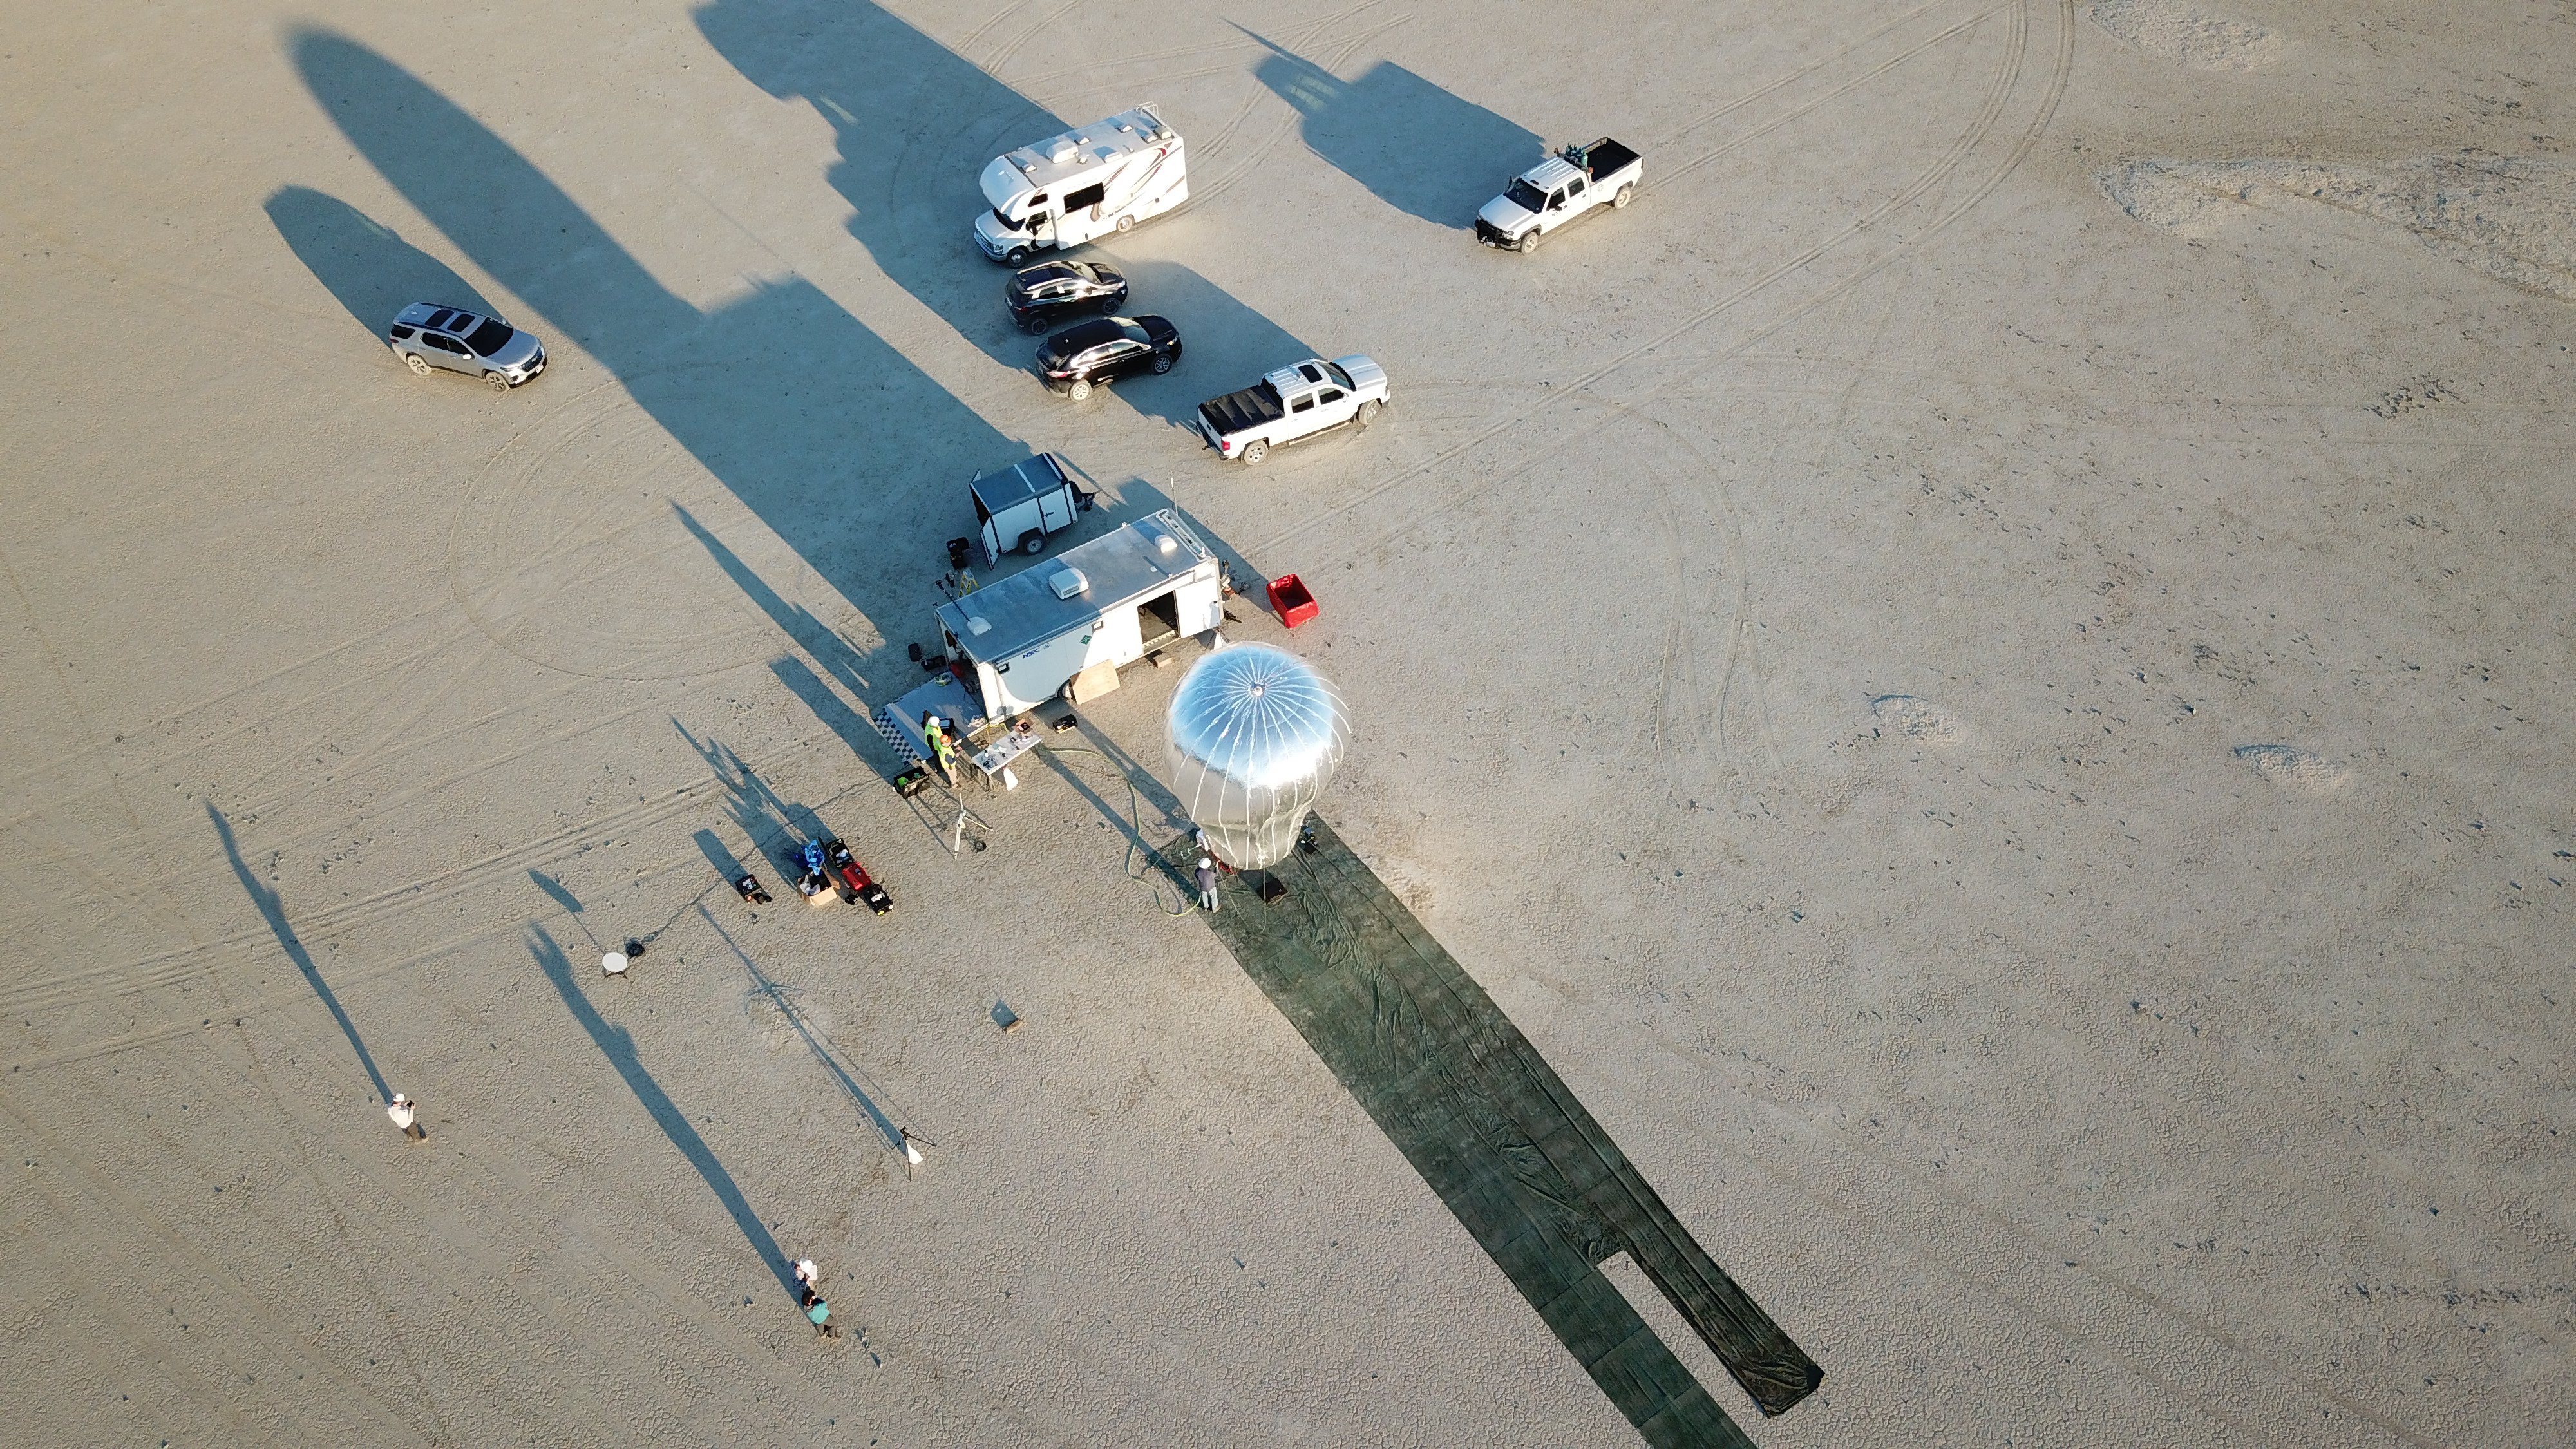 Picture: Team readies the inflated aerobot for the launch of its first flight.